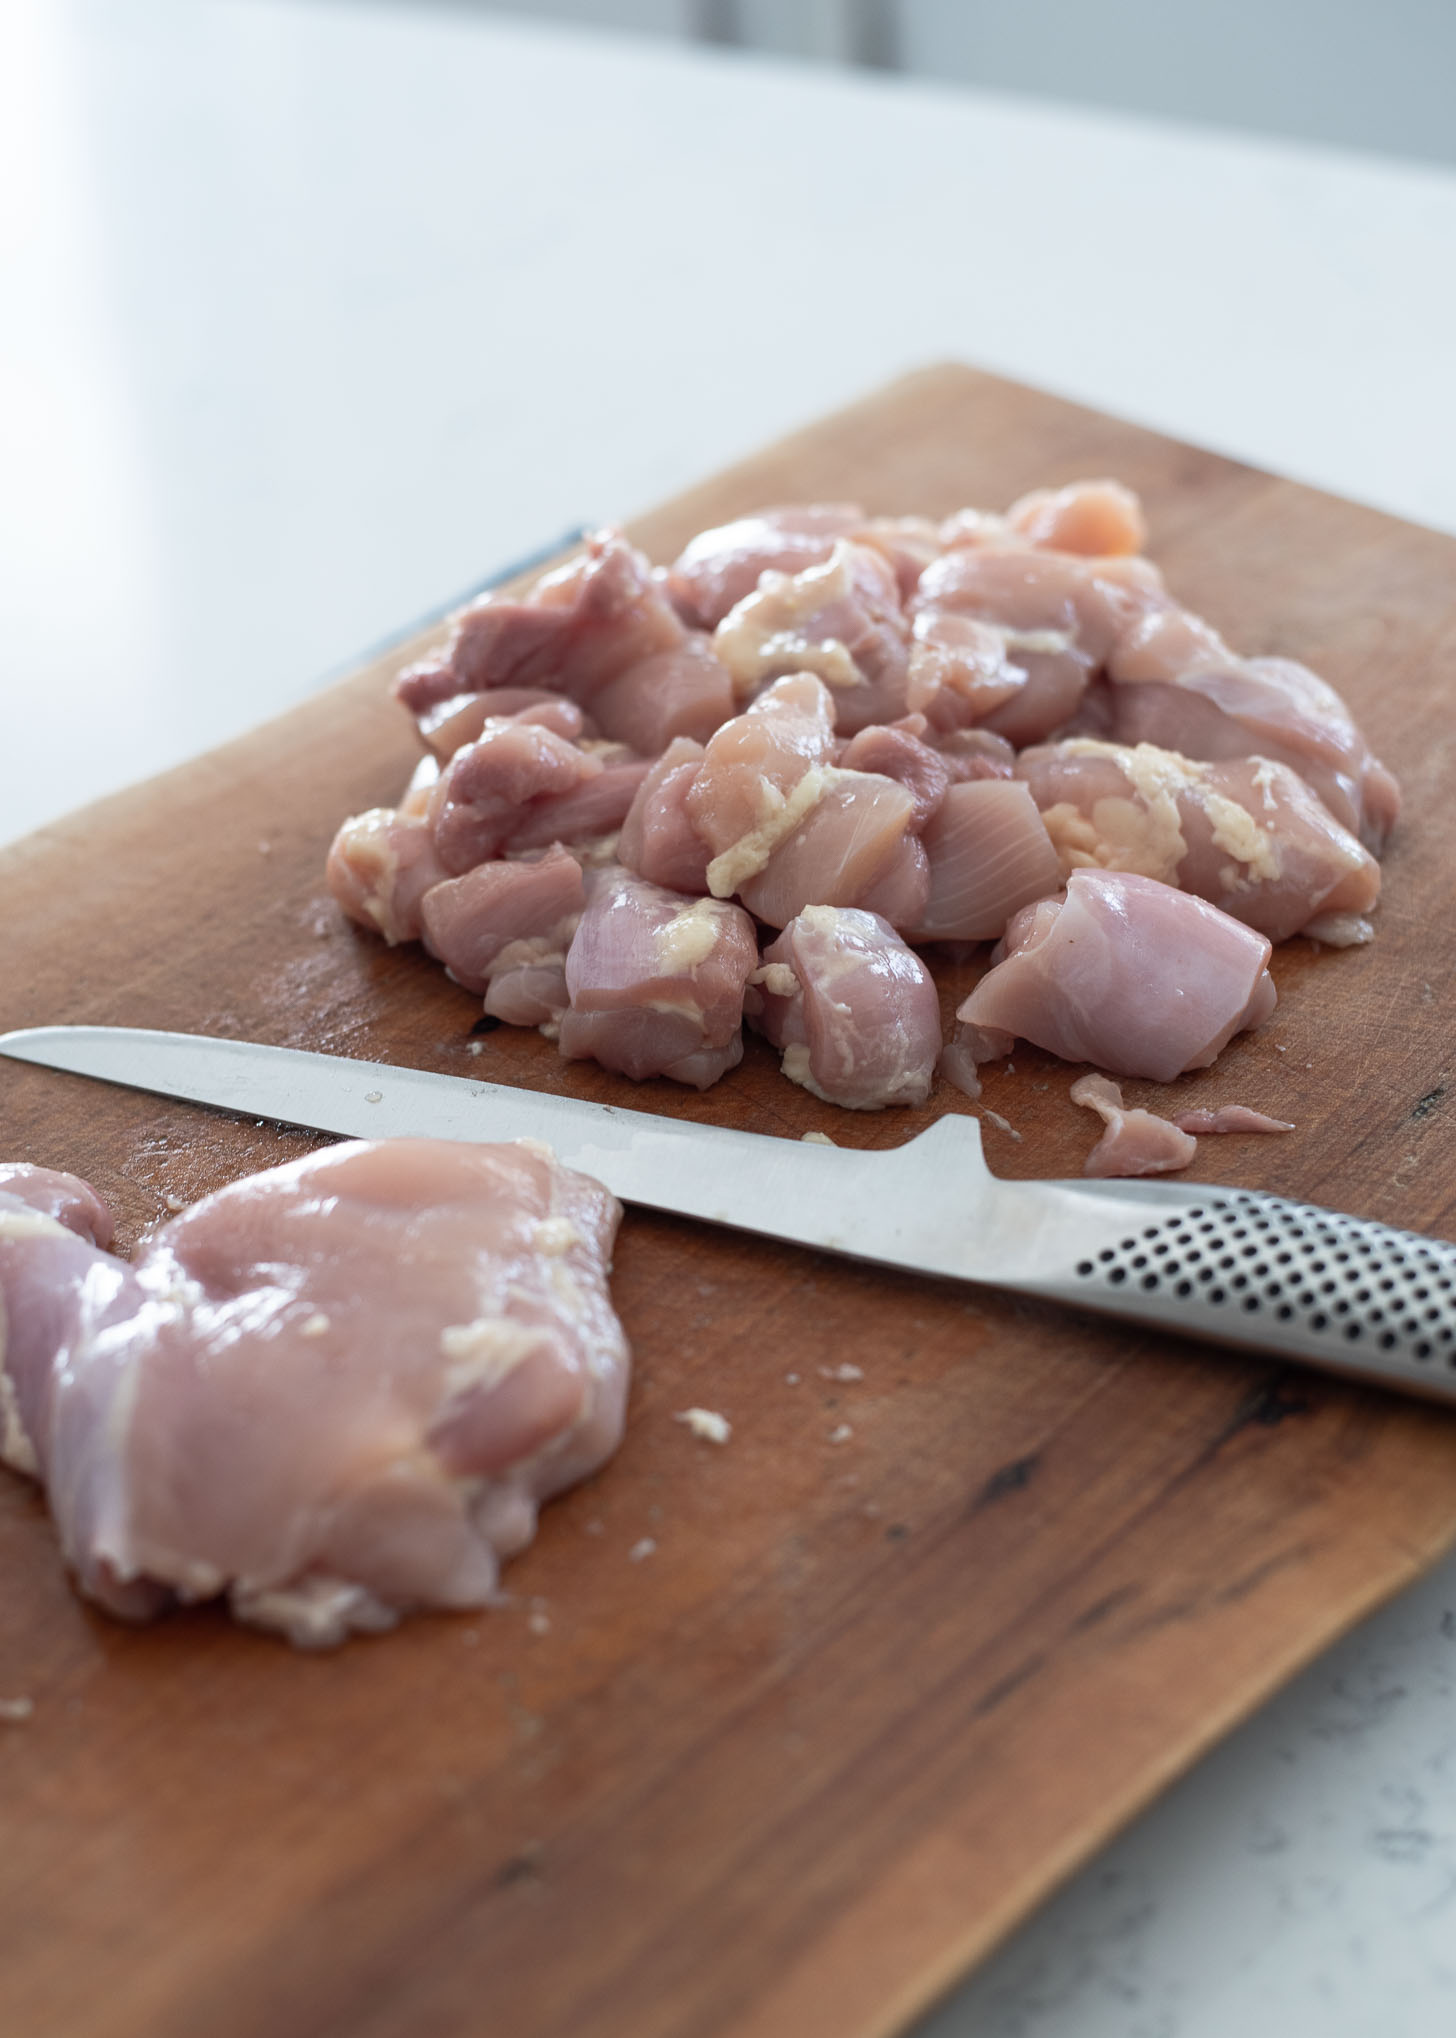 Boneless skinless chicken thigh diced into small pieces.